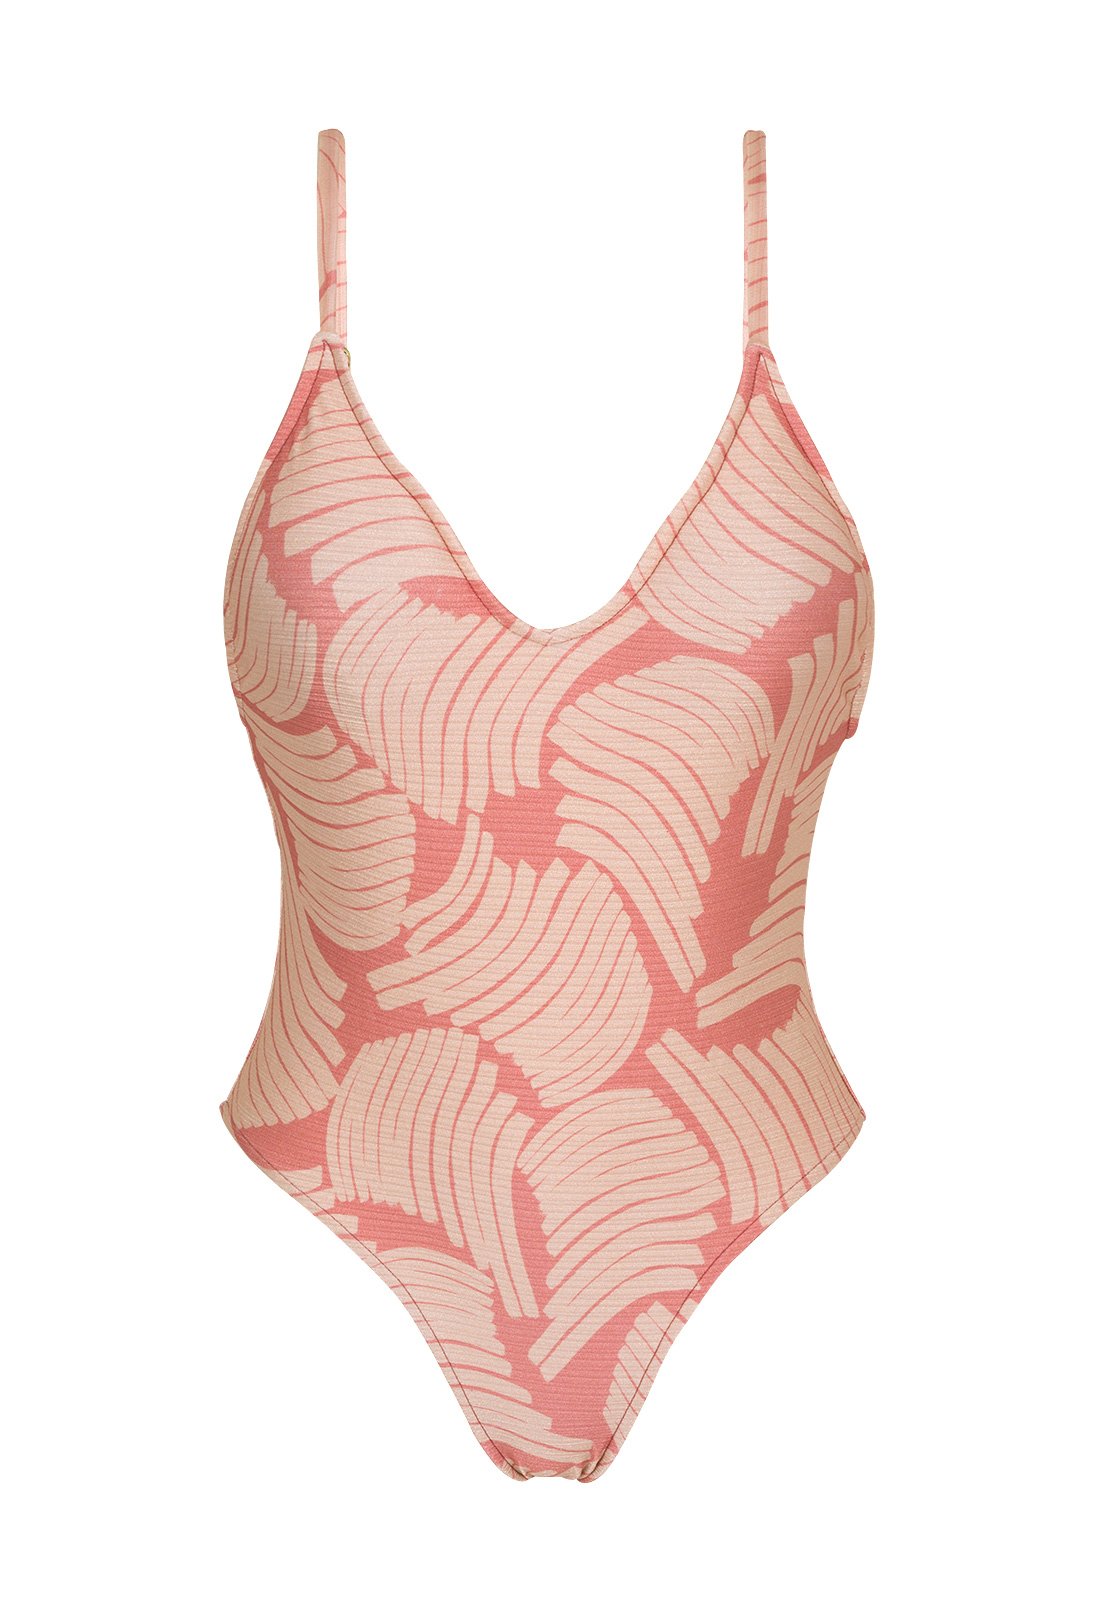 MINKPINK Graphic Cheeky One-Piece High-Leg Swimsuit $99 Size L # 1U 354 NEW 